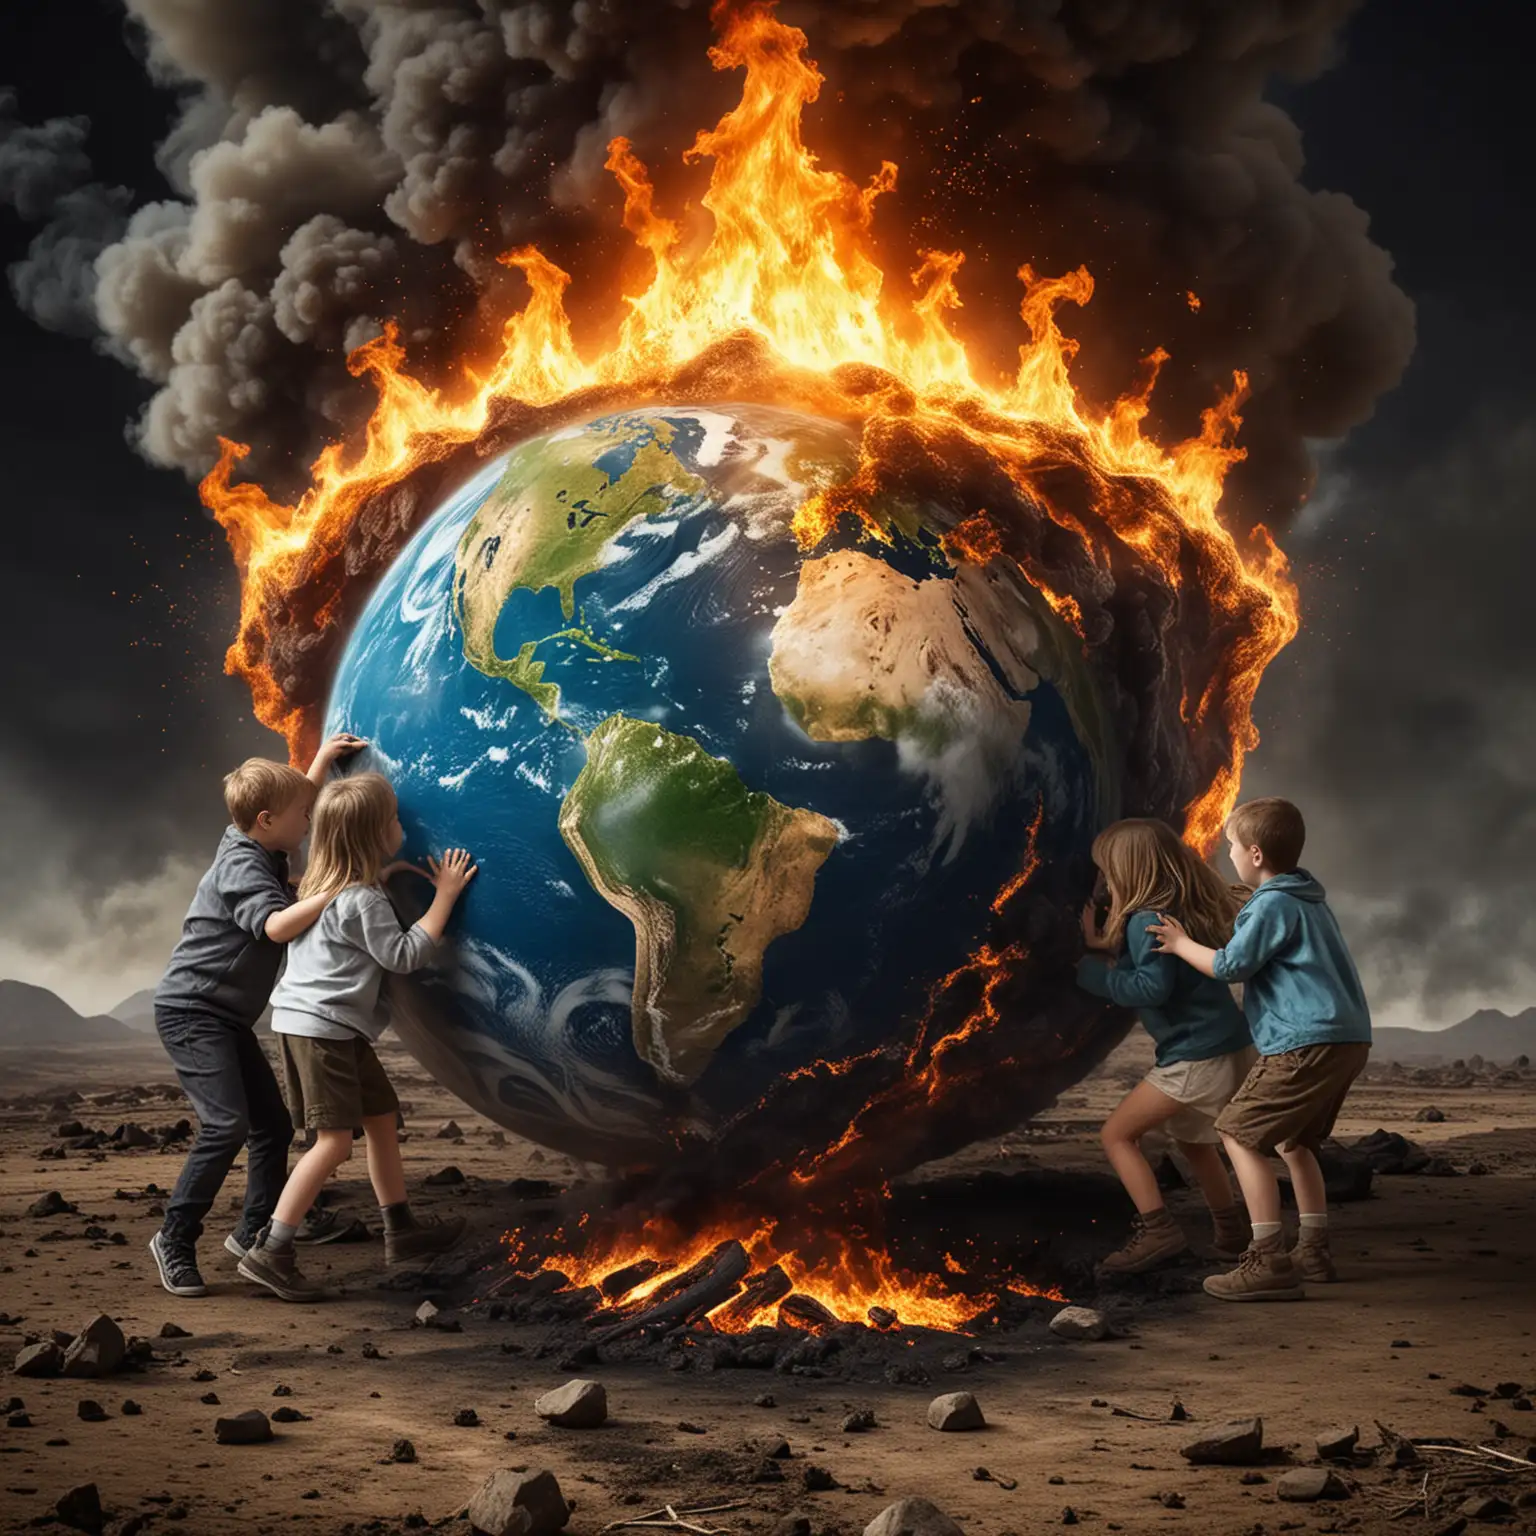 can you create a realistic image of earth but it is catching on fire. 

Below the Earth, you can see little kids attempting to put out the fire